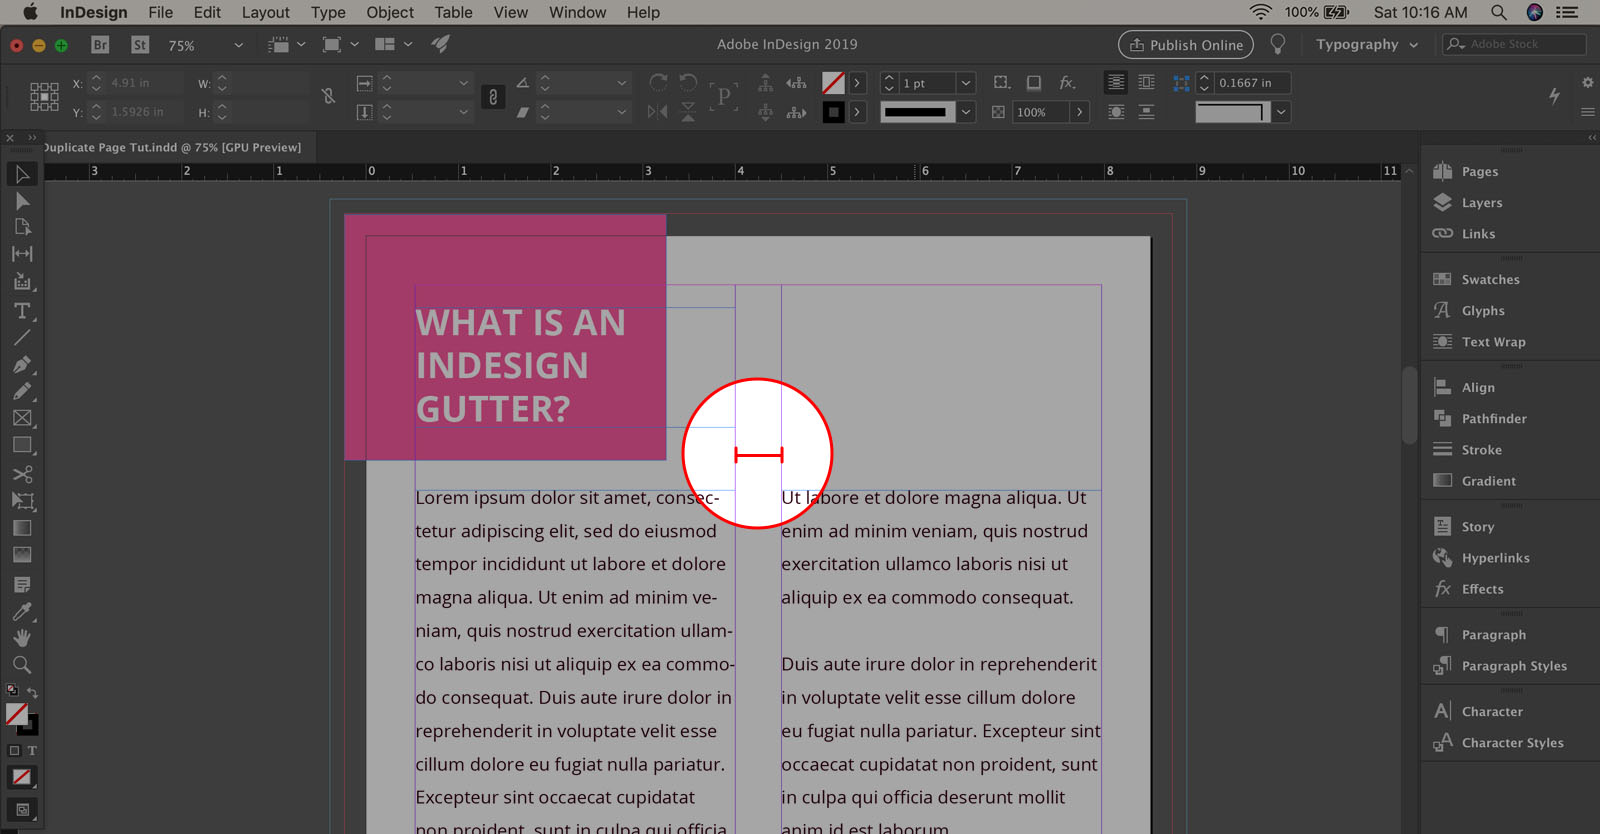 What is an InDesign gutter